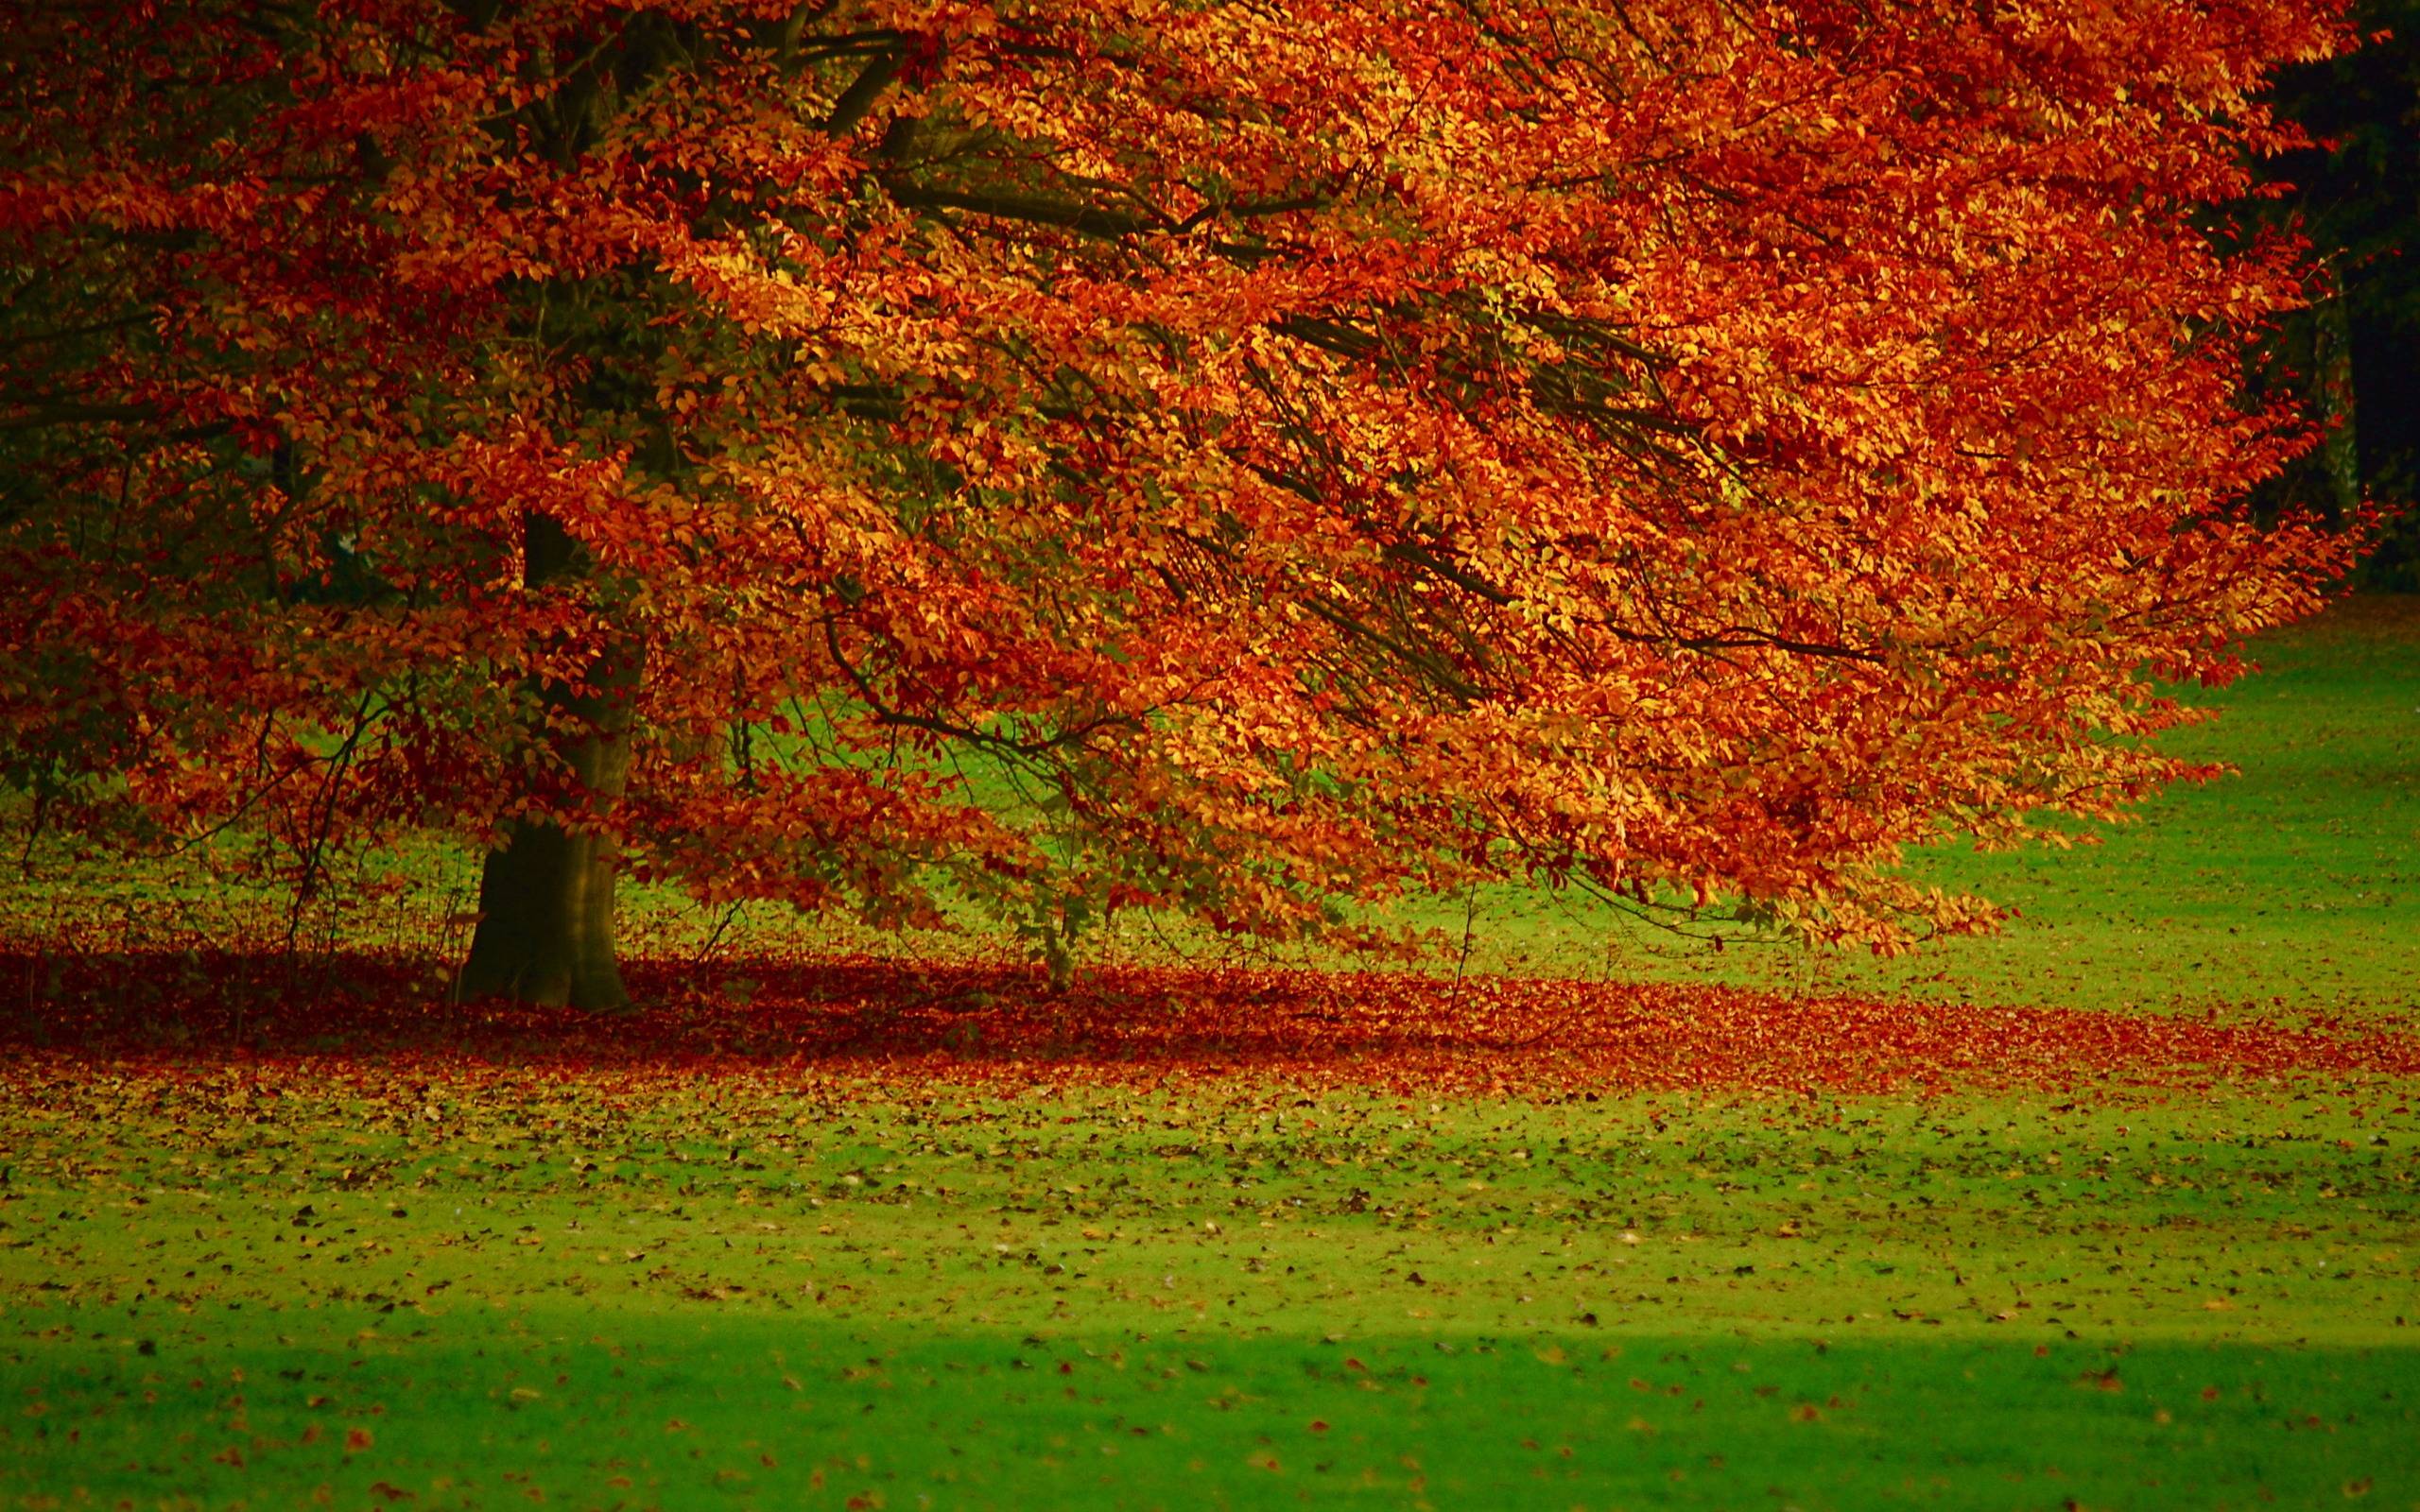 Autumn foliage wallpaper and image, picture, photo